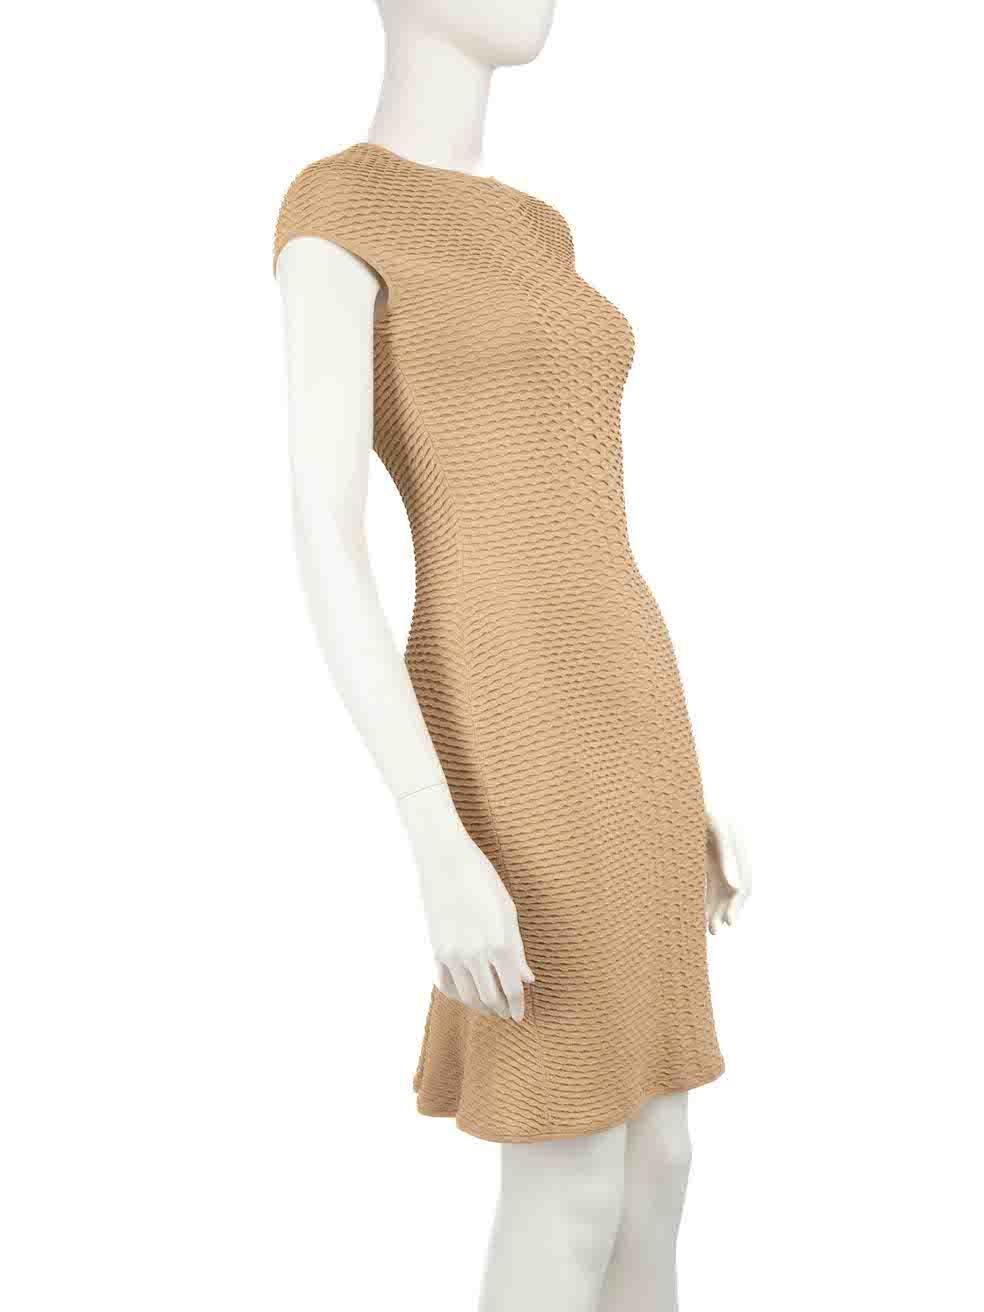 CONDITION is Never worn, with tags. No visible wear to dress is evident on this new Alexander McQueen designer resale item.
 
 
 
 Details
 
 
 Beige
 
 Viscose
 
 Knit dress
 
 Mini
 
 Short sleeves
 
 Round neck
 
 Bodycon
 
 Figure hugging fit
 
